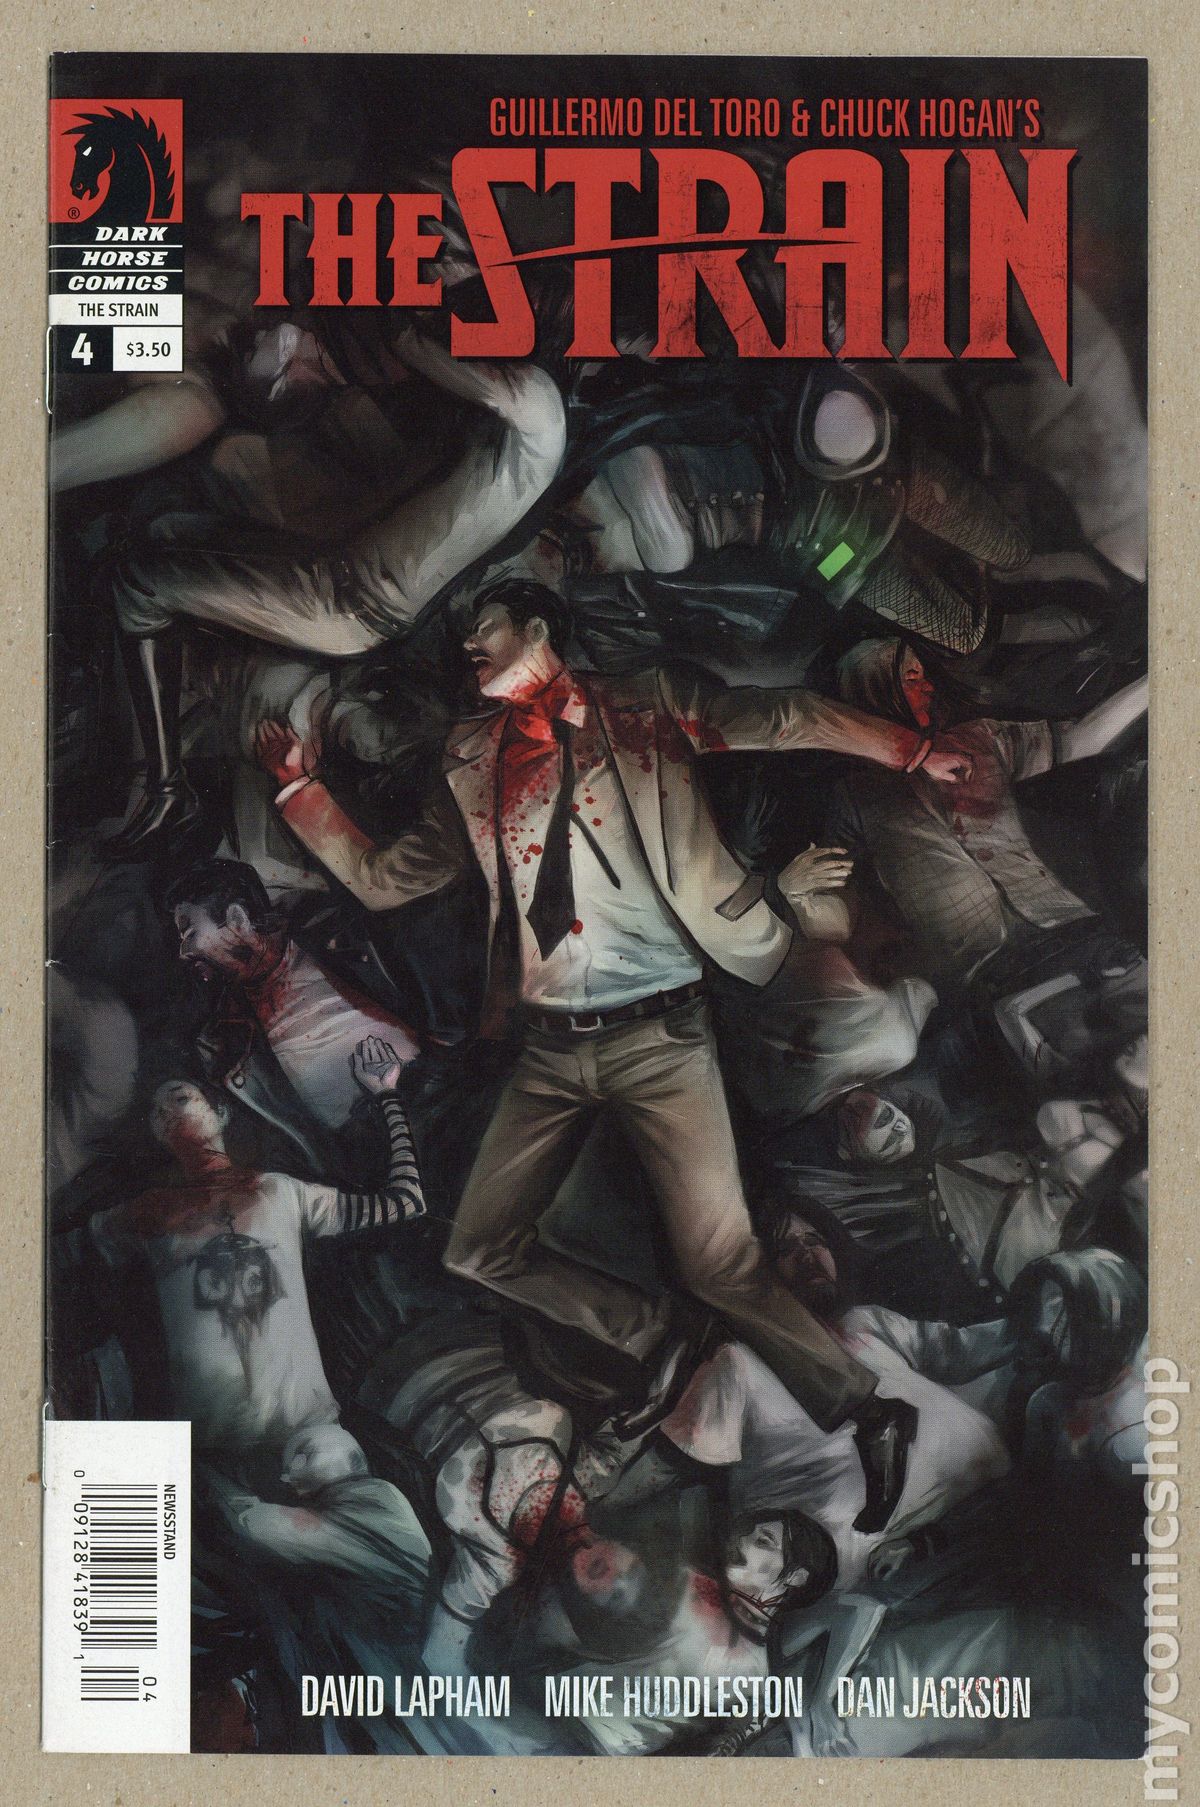 the strain dvd poster